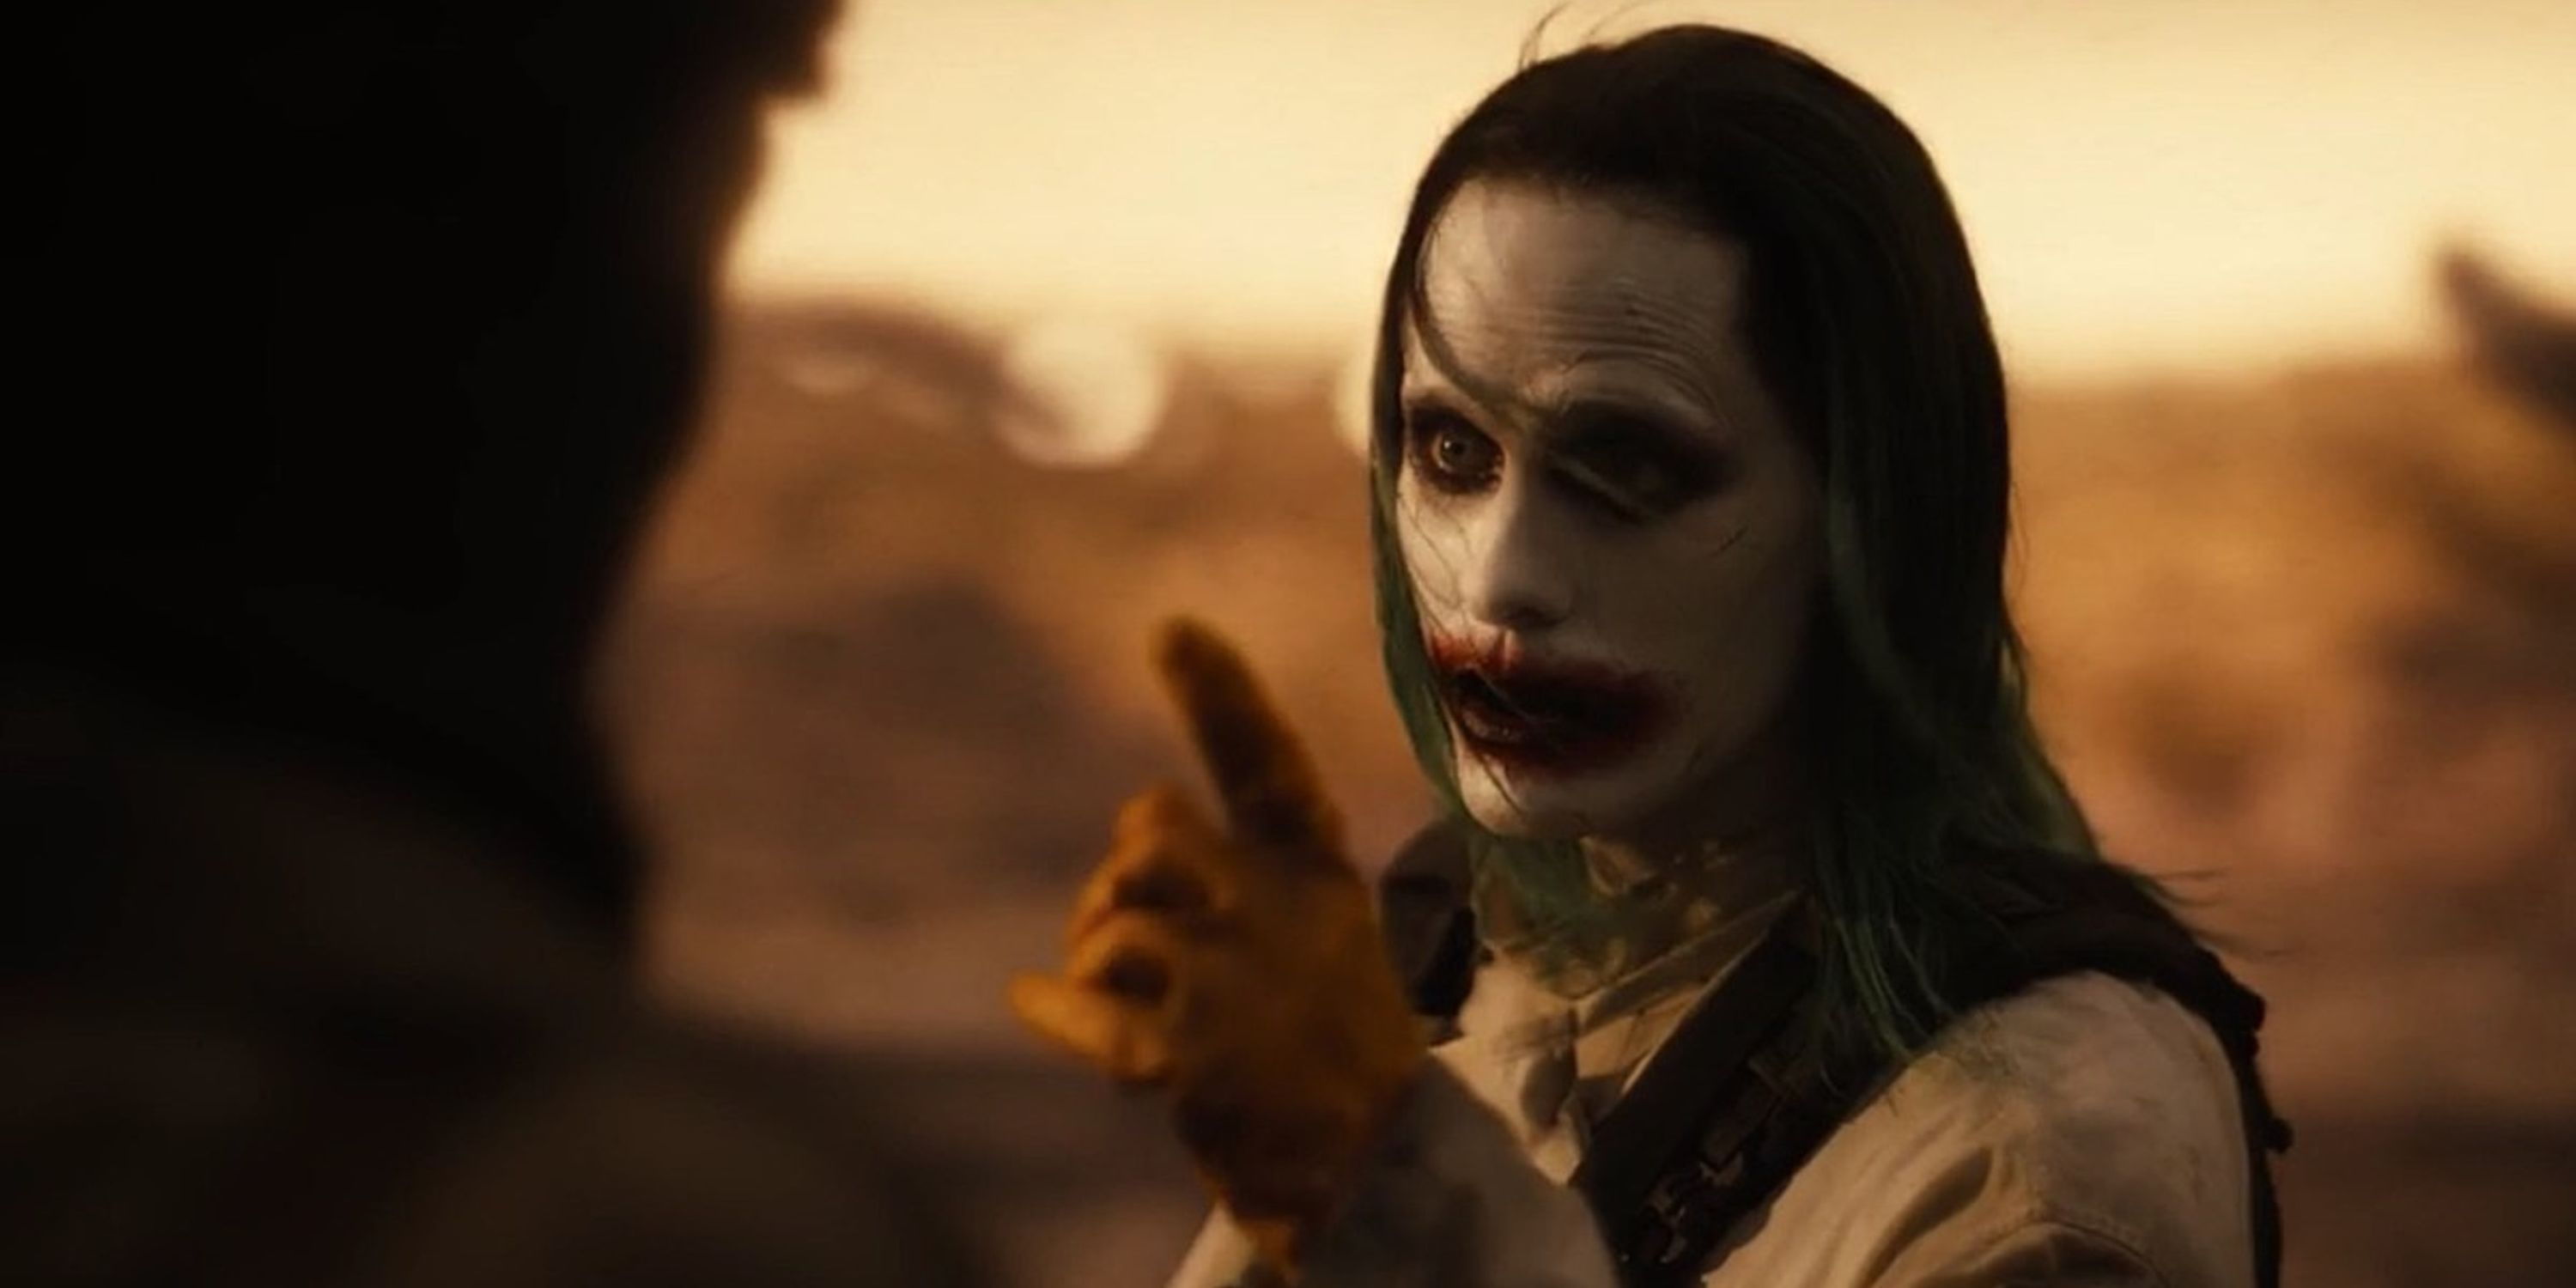 Jared Leto's Joker in the Snyder Cut of Justice League